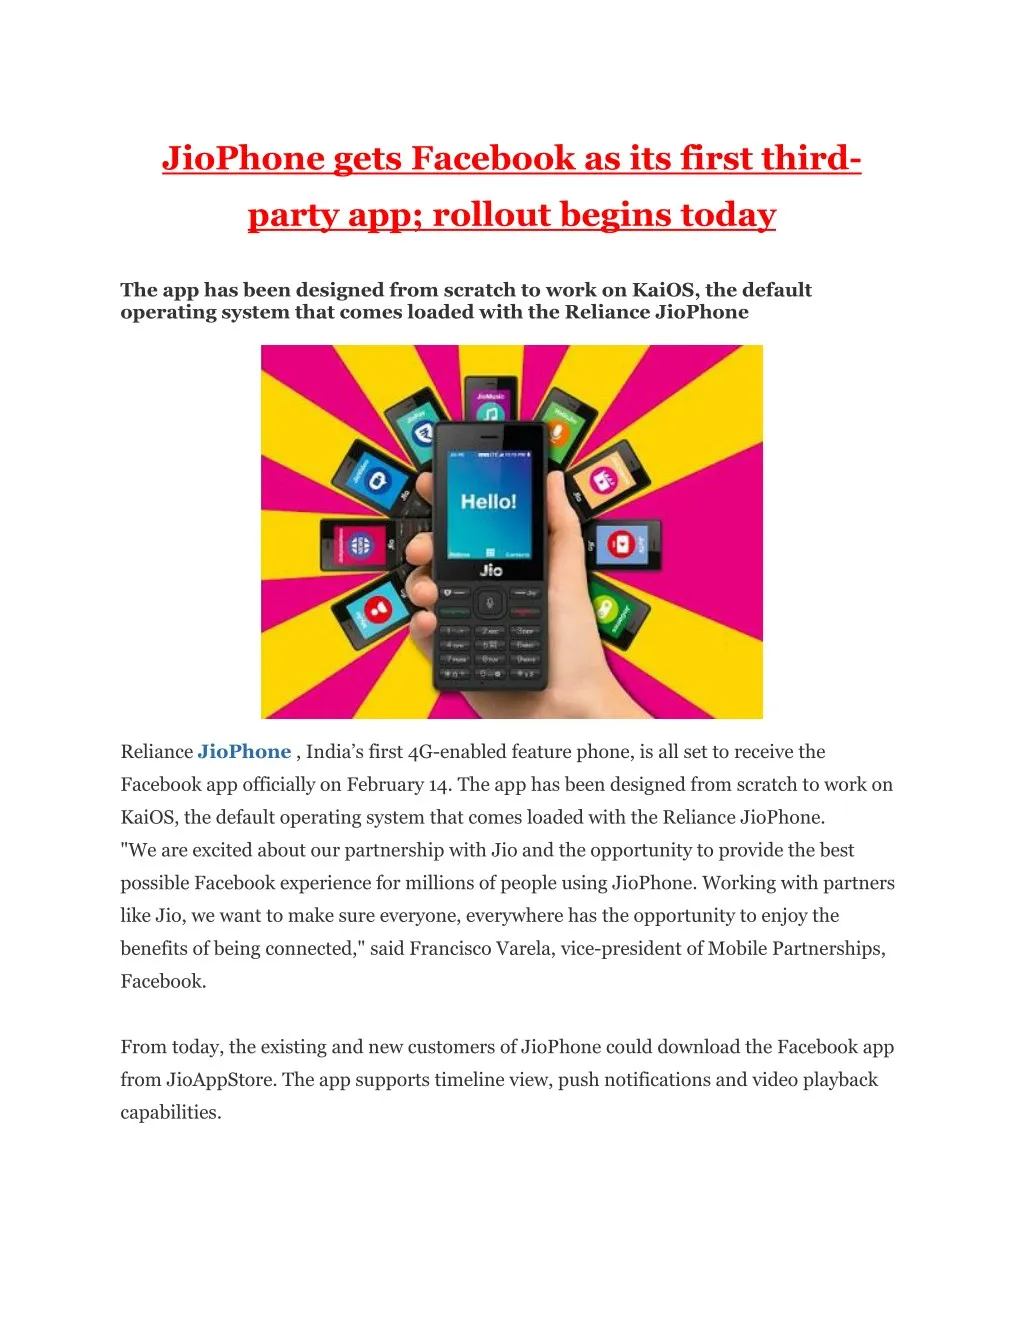 jiophone gets facebook as its first third